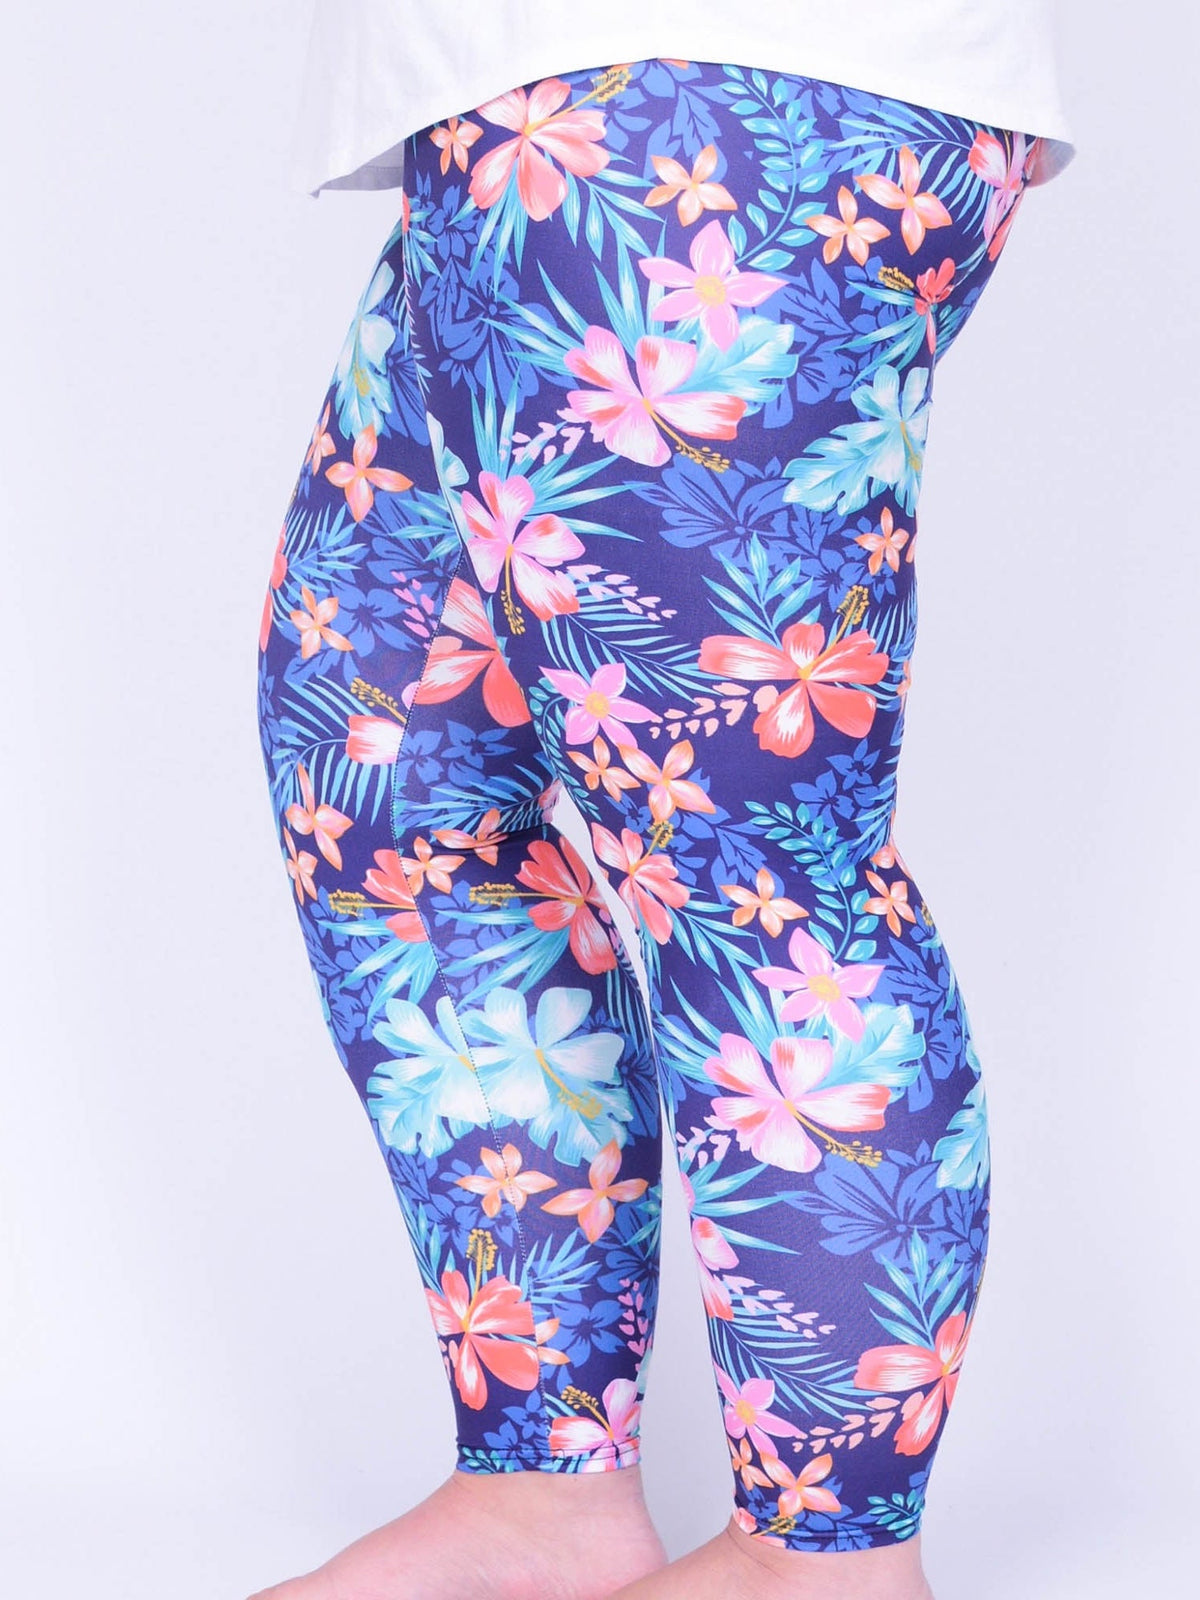 Leggings - Tropical - L2, Trousers, Pure Plus Clothing, Lagenlook Clothing, Plus Size Fashion, Over 50 Fashion